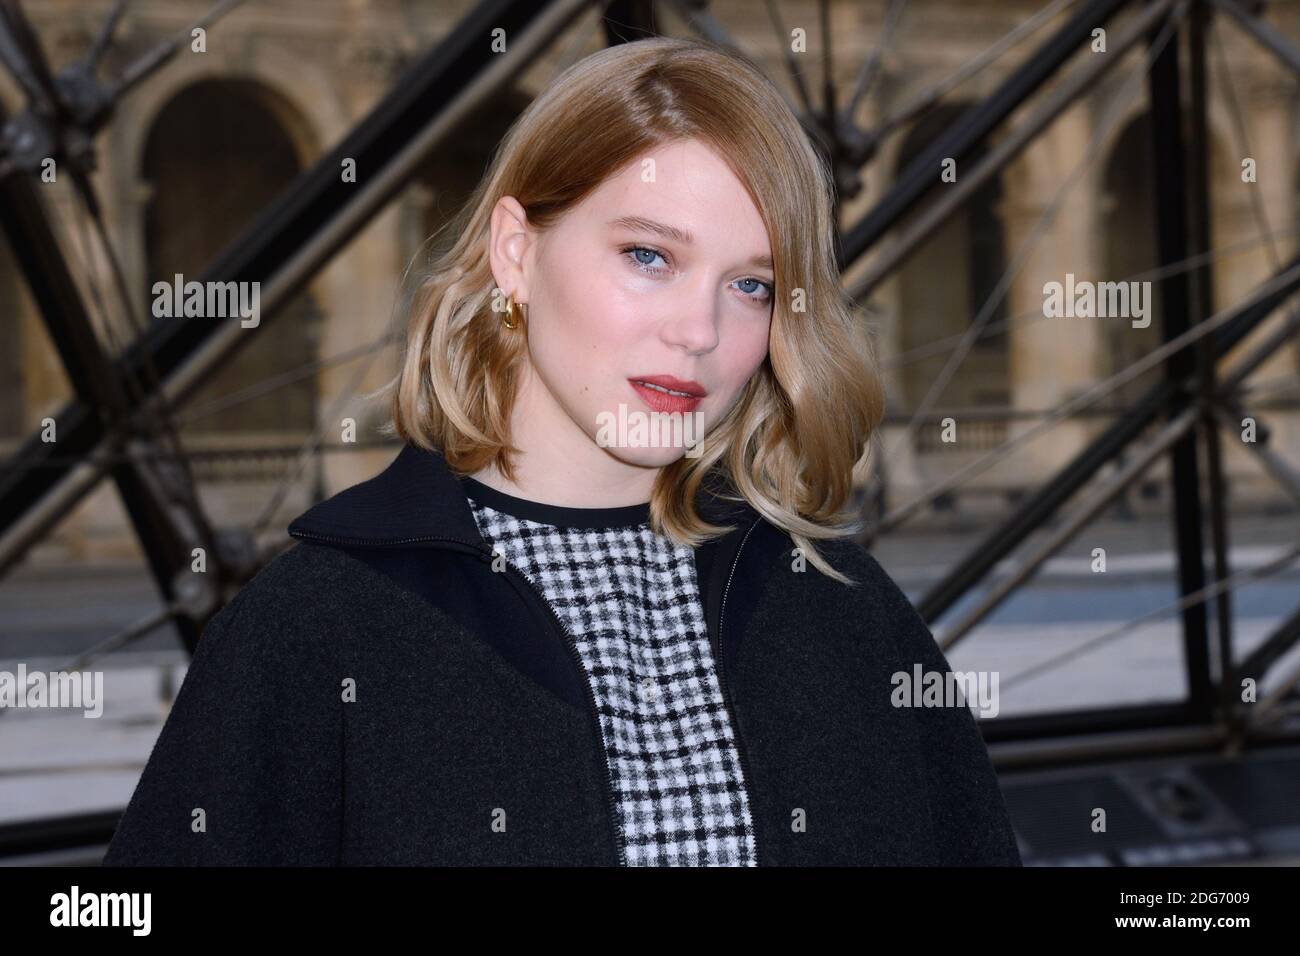 Lea Seydoux attending the photocall before the Louis Vuitton show